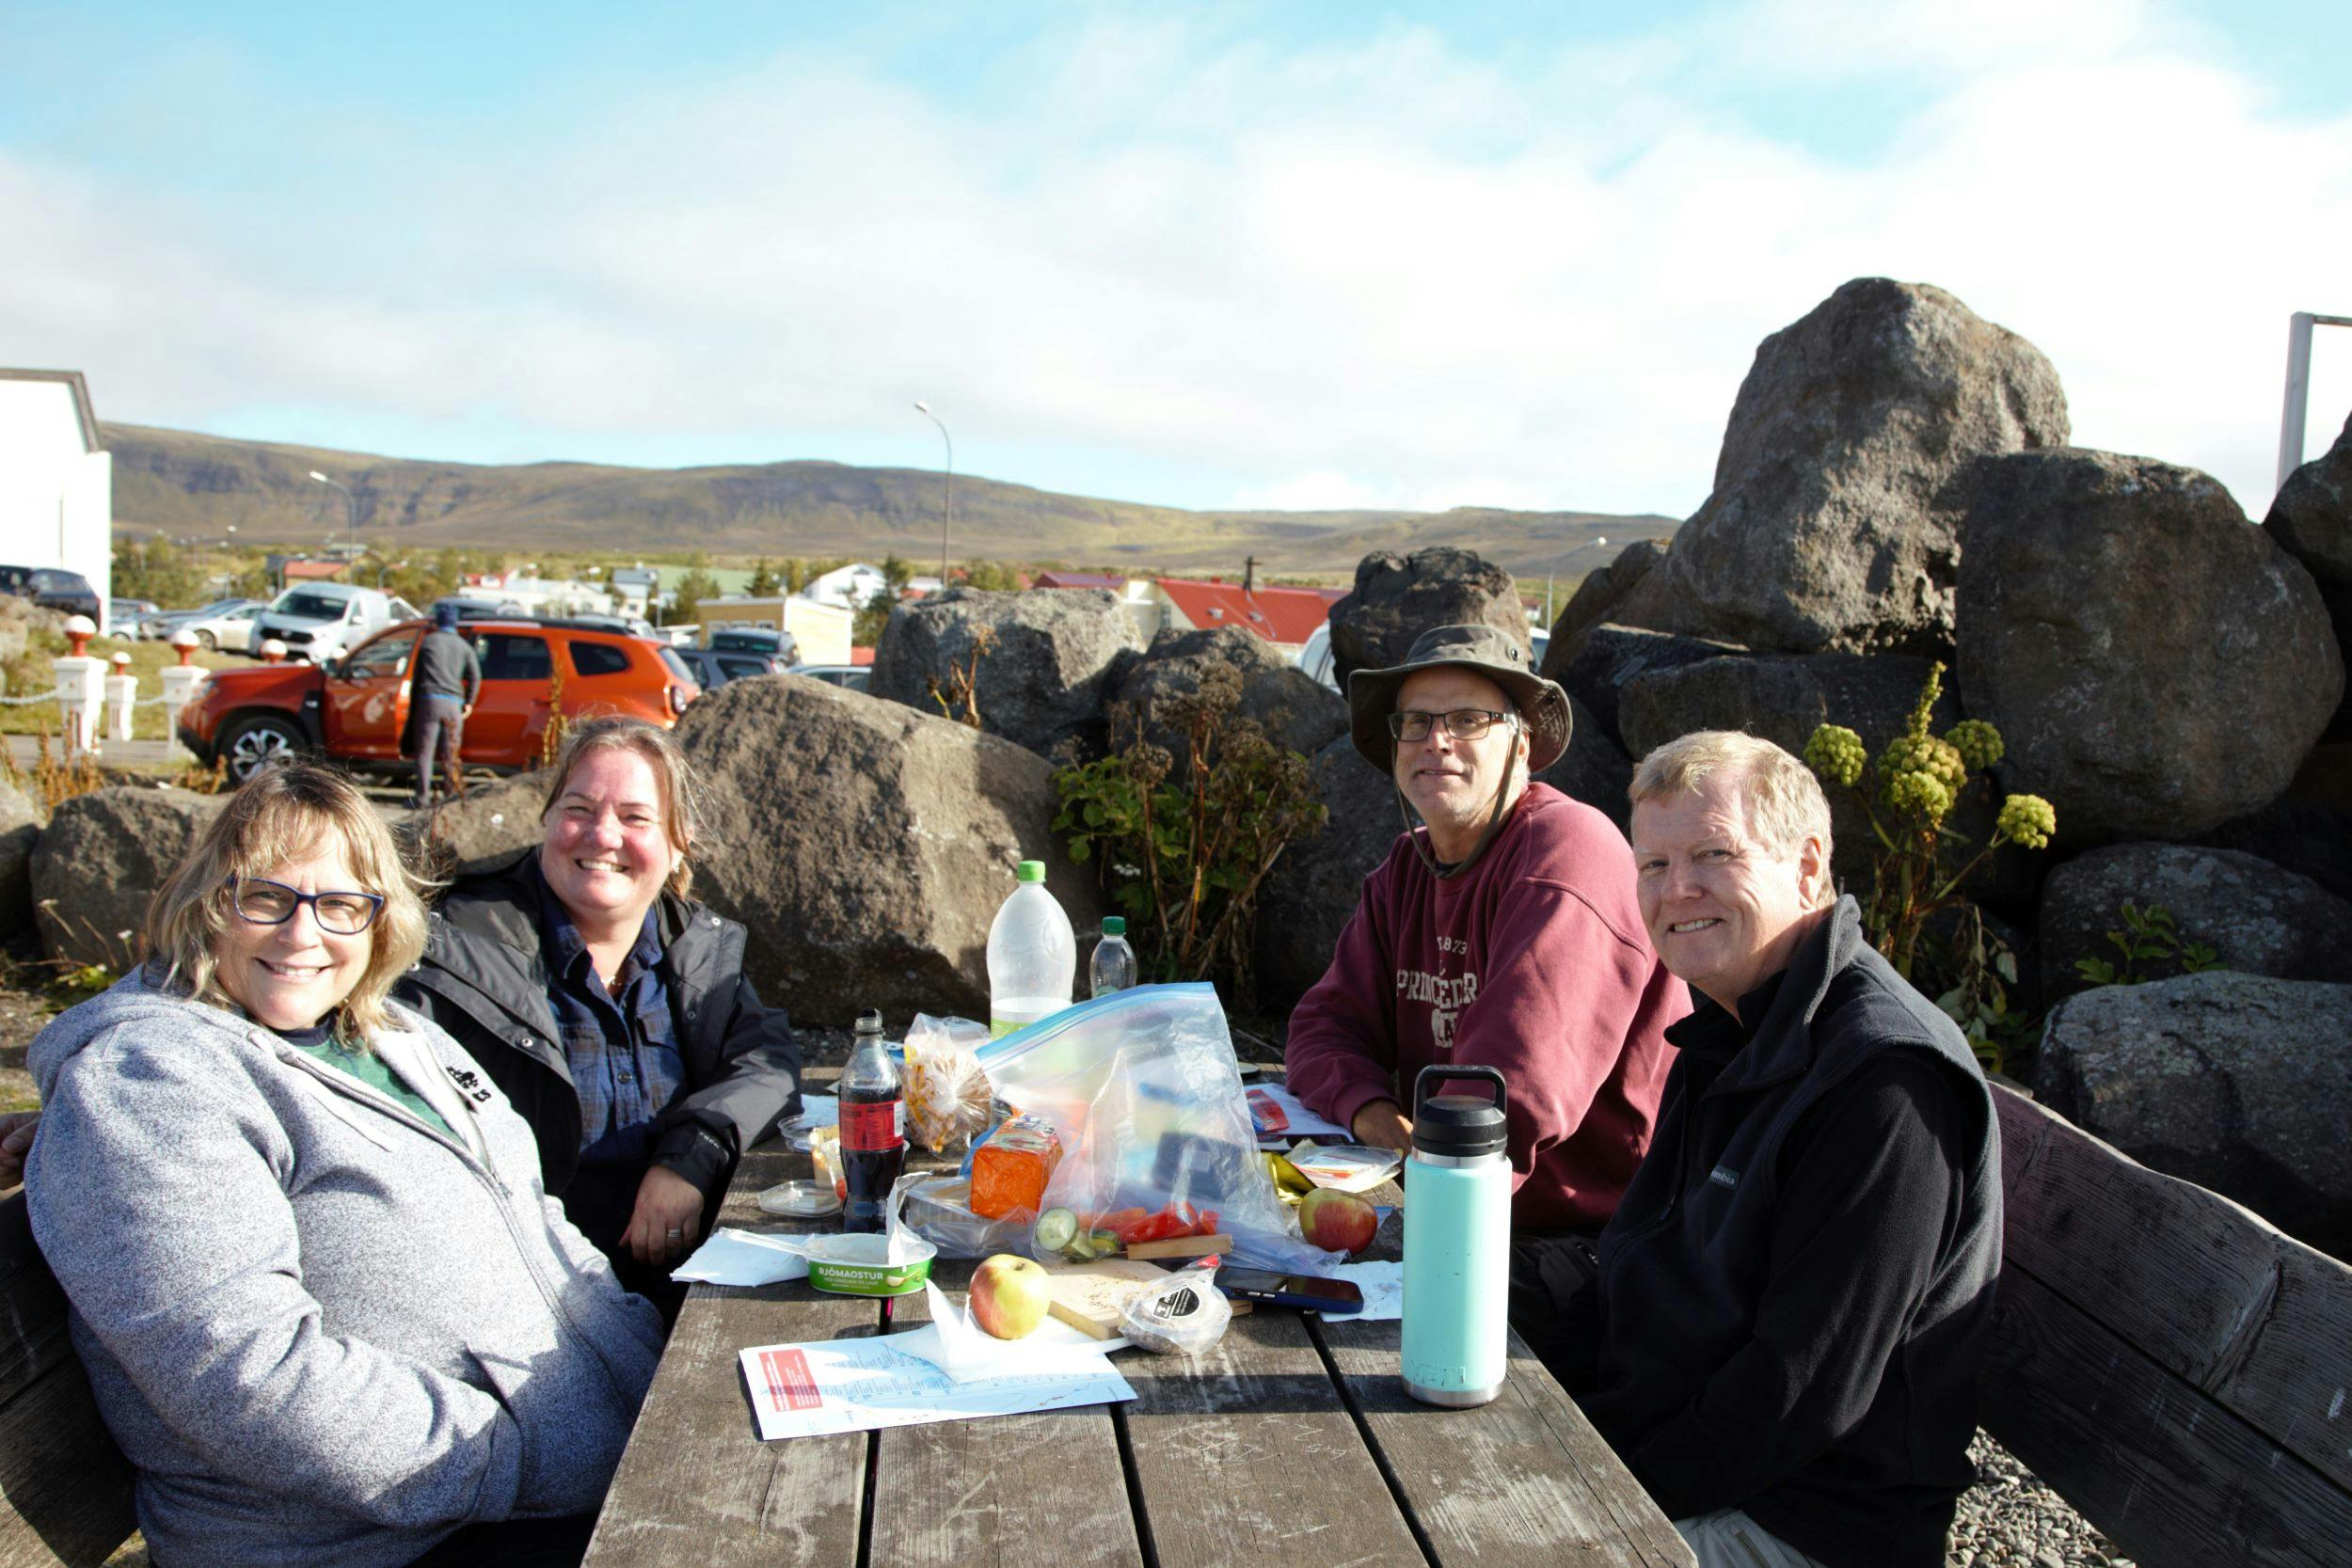 Two women and two men sitting at a picnic table having lunch, smiling into the camera. Mountains in the background